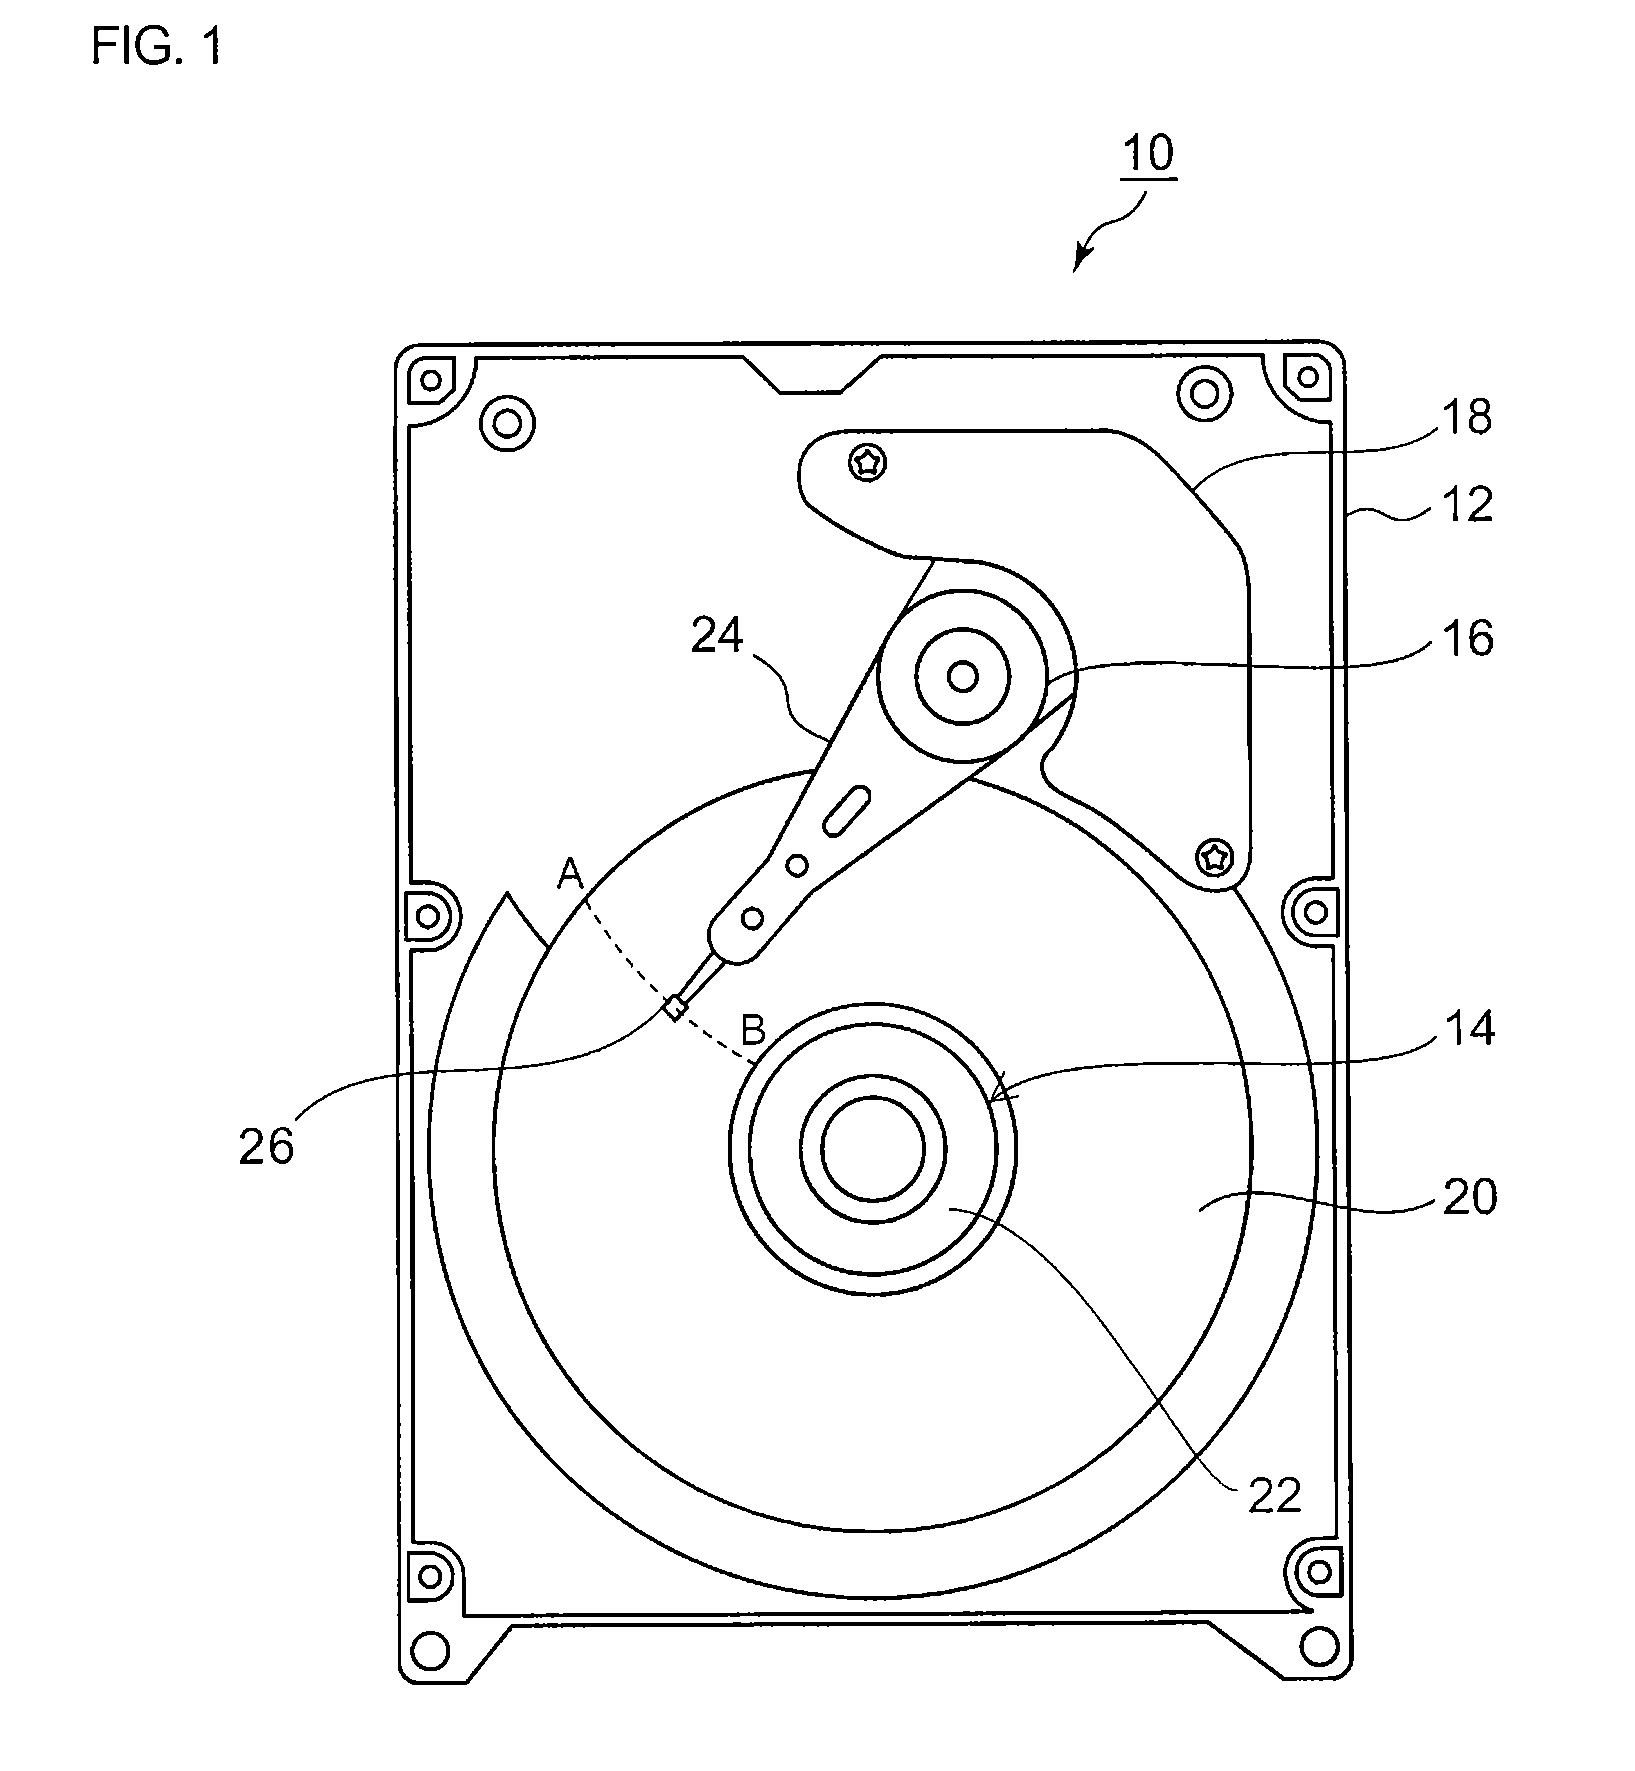 Disk drive device improved in stiffness of fluid dynamic bearing